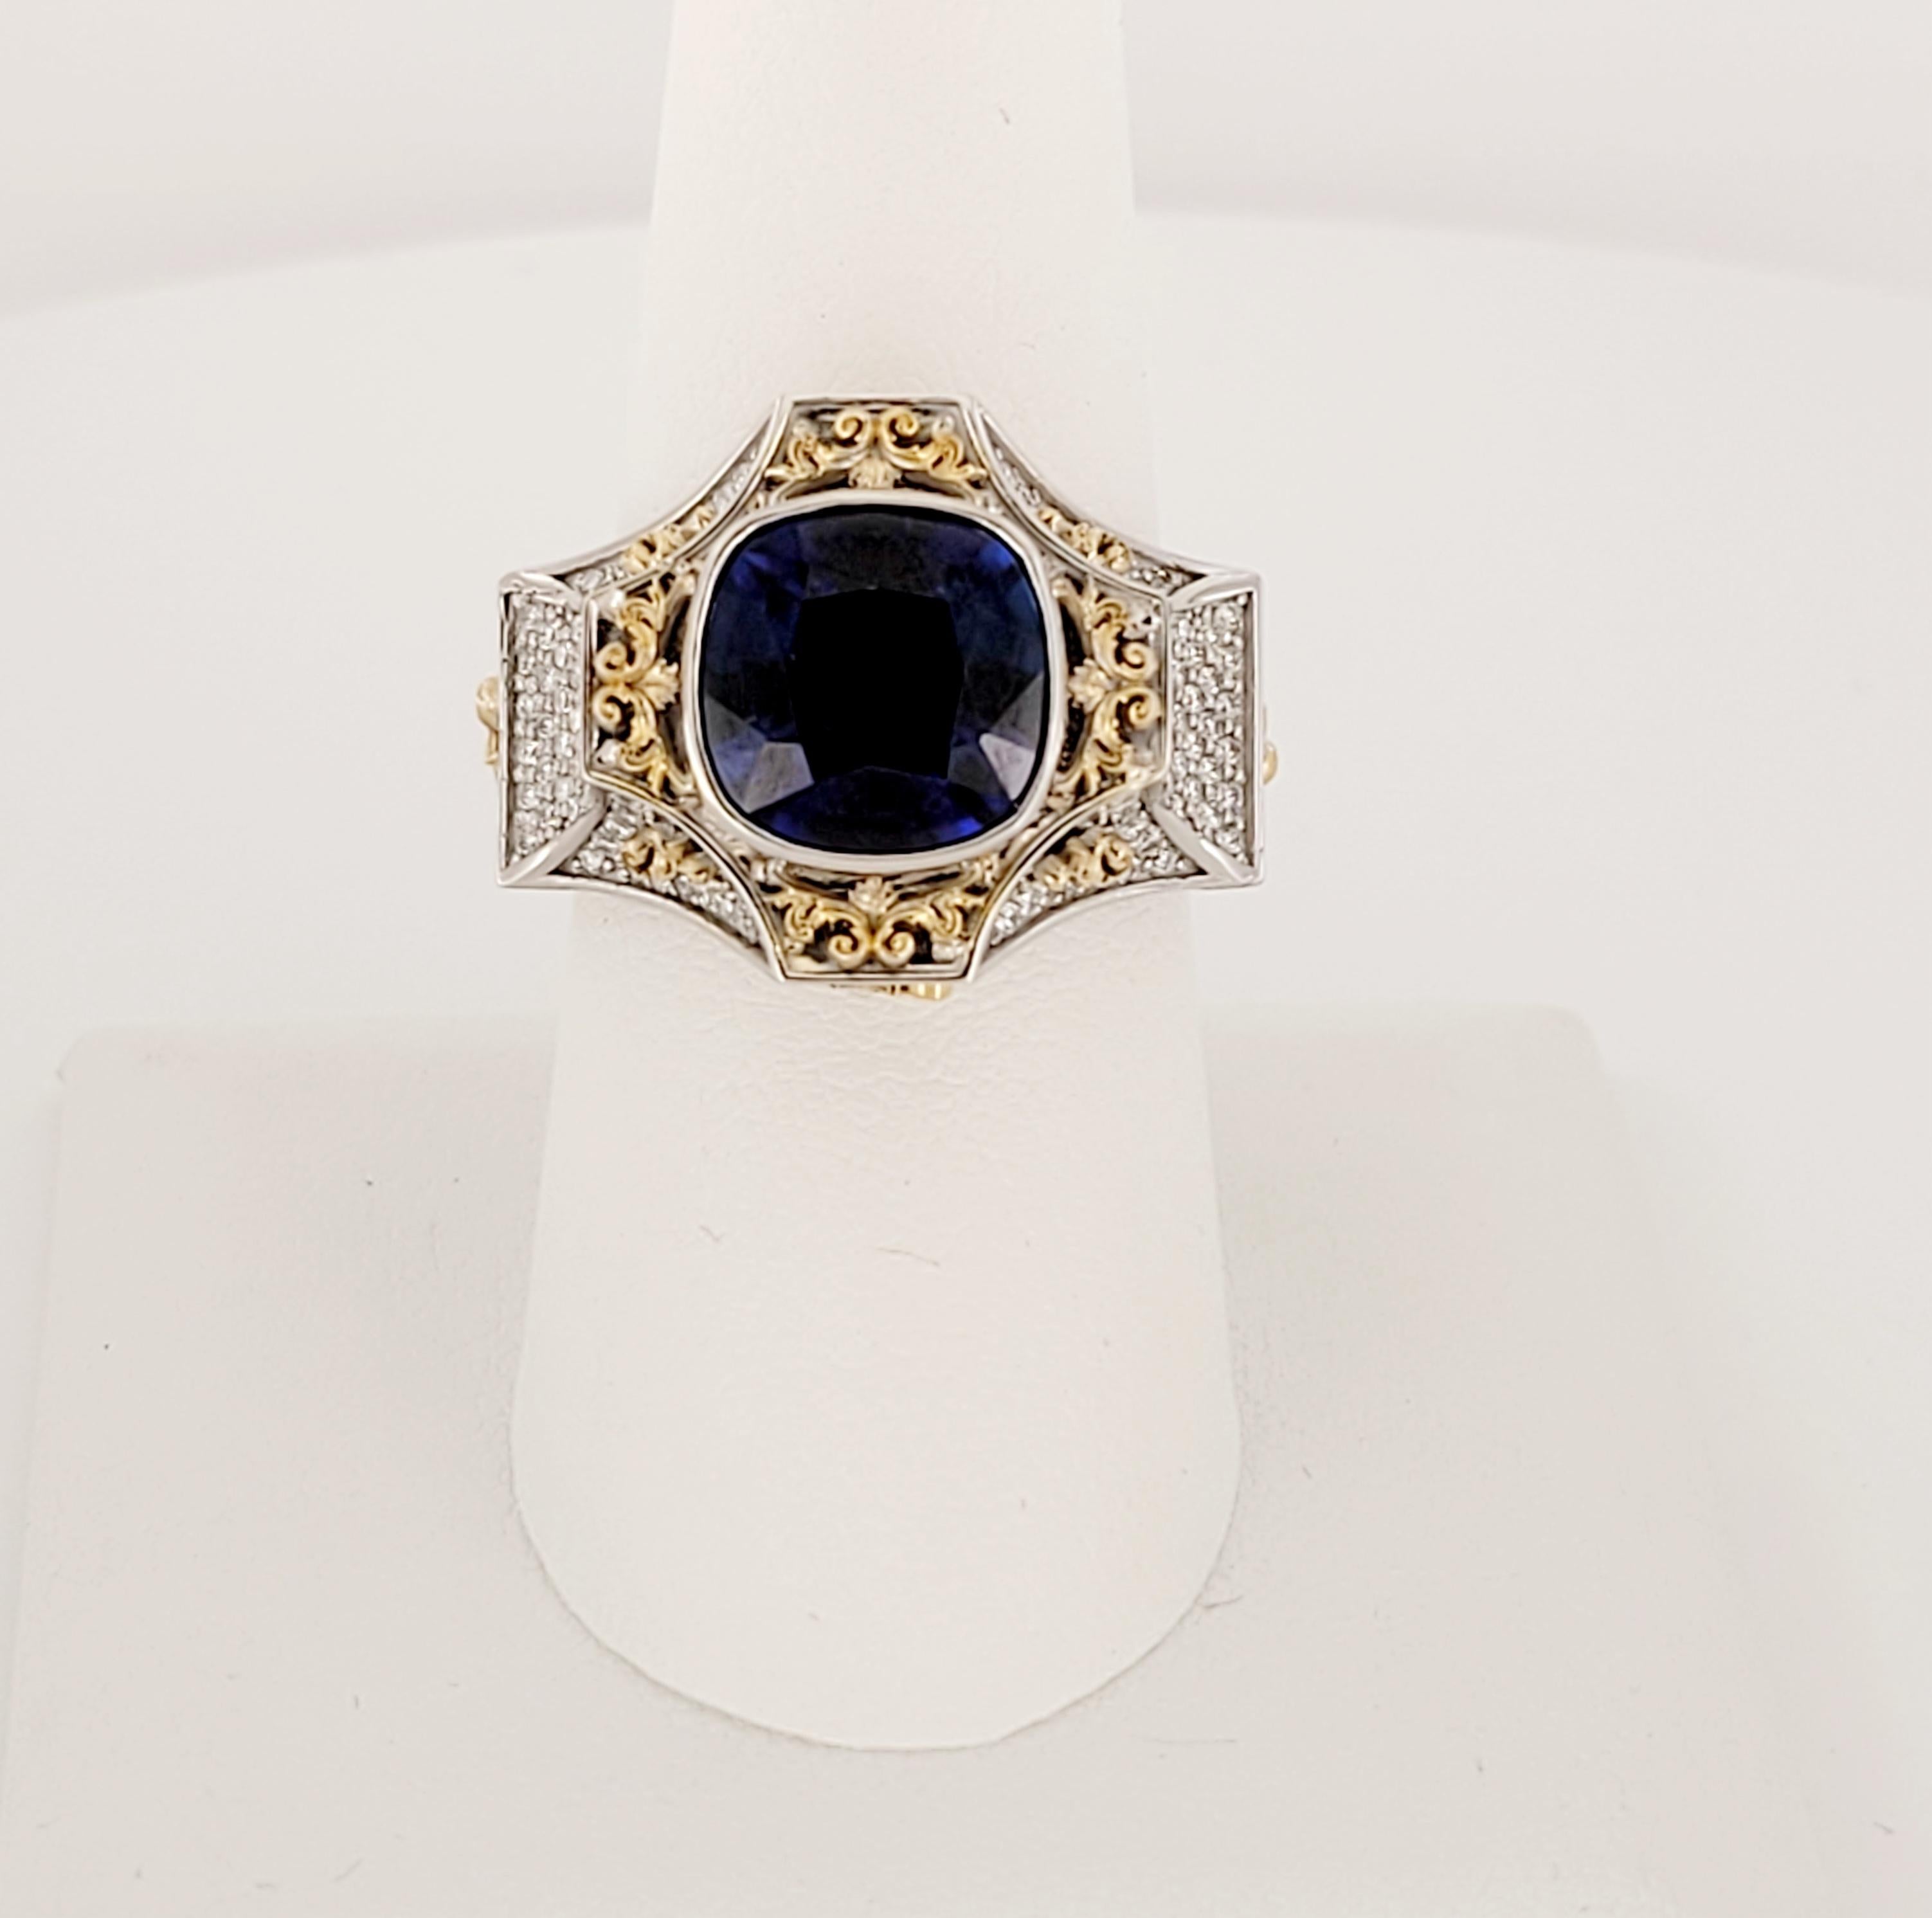 Unbranded Two-Tone ring
14K White Gold & 18K Yellow Gold
Sapphire and Diamonds
Main Stone Sapphire 3.25ct
Diamond 2.25ct
Diamond Clarity VS
Color Grade G 
Ring Size 8.75
Ring Weight 13.9gr
Condition New without tags
Retail Price $ 9.500